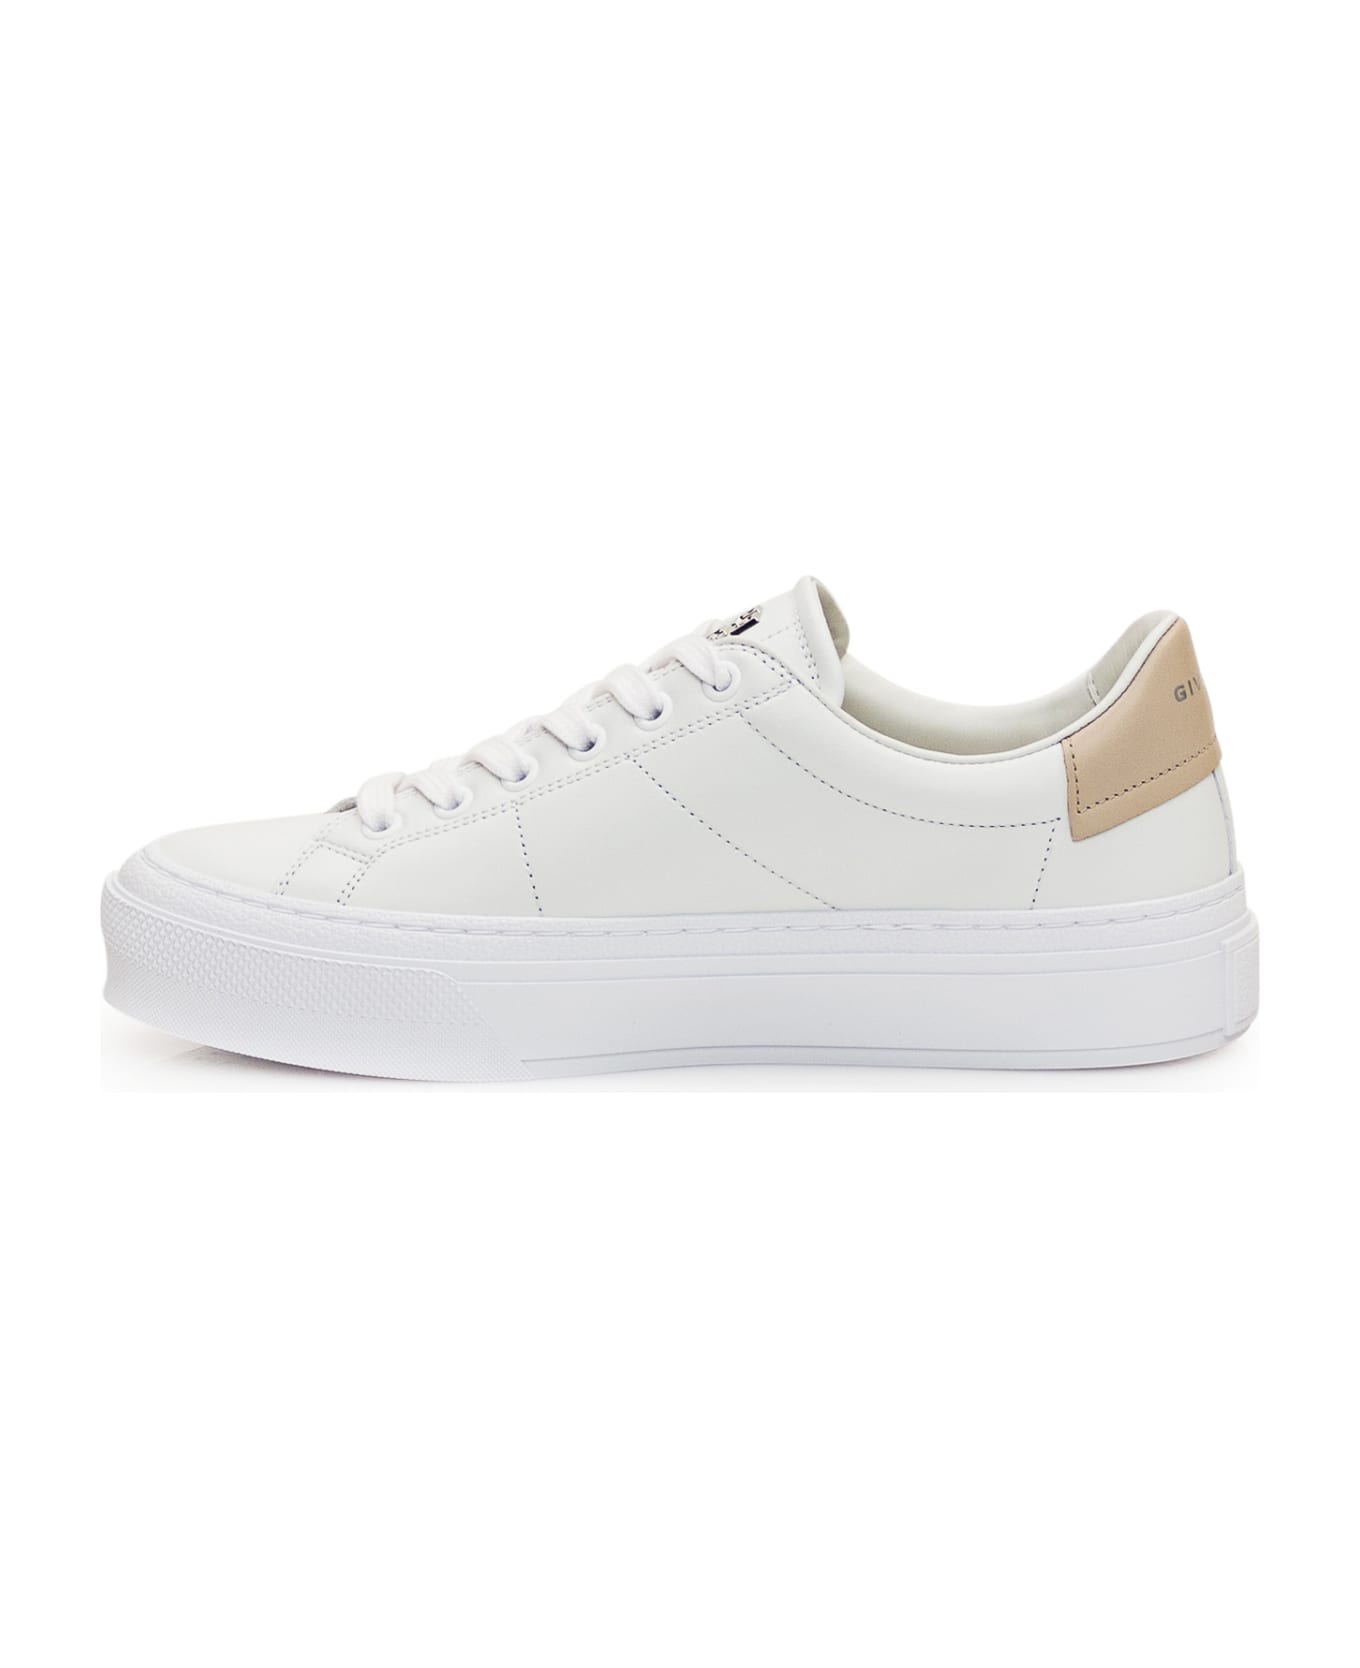 Givenchy City Sport Sneaker - White/beige